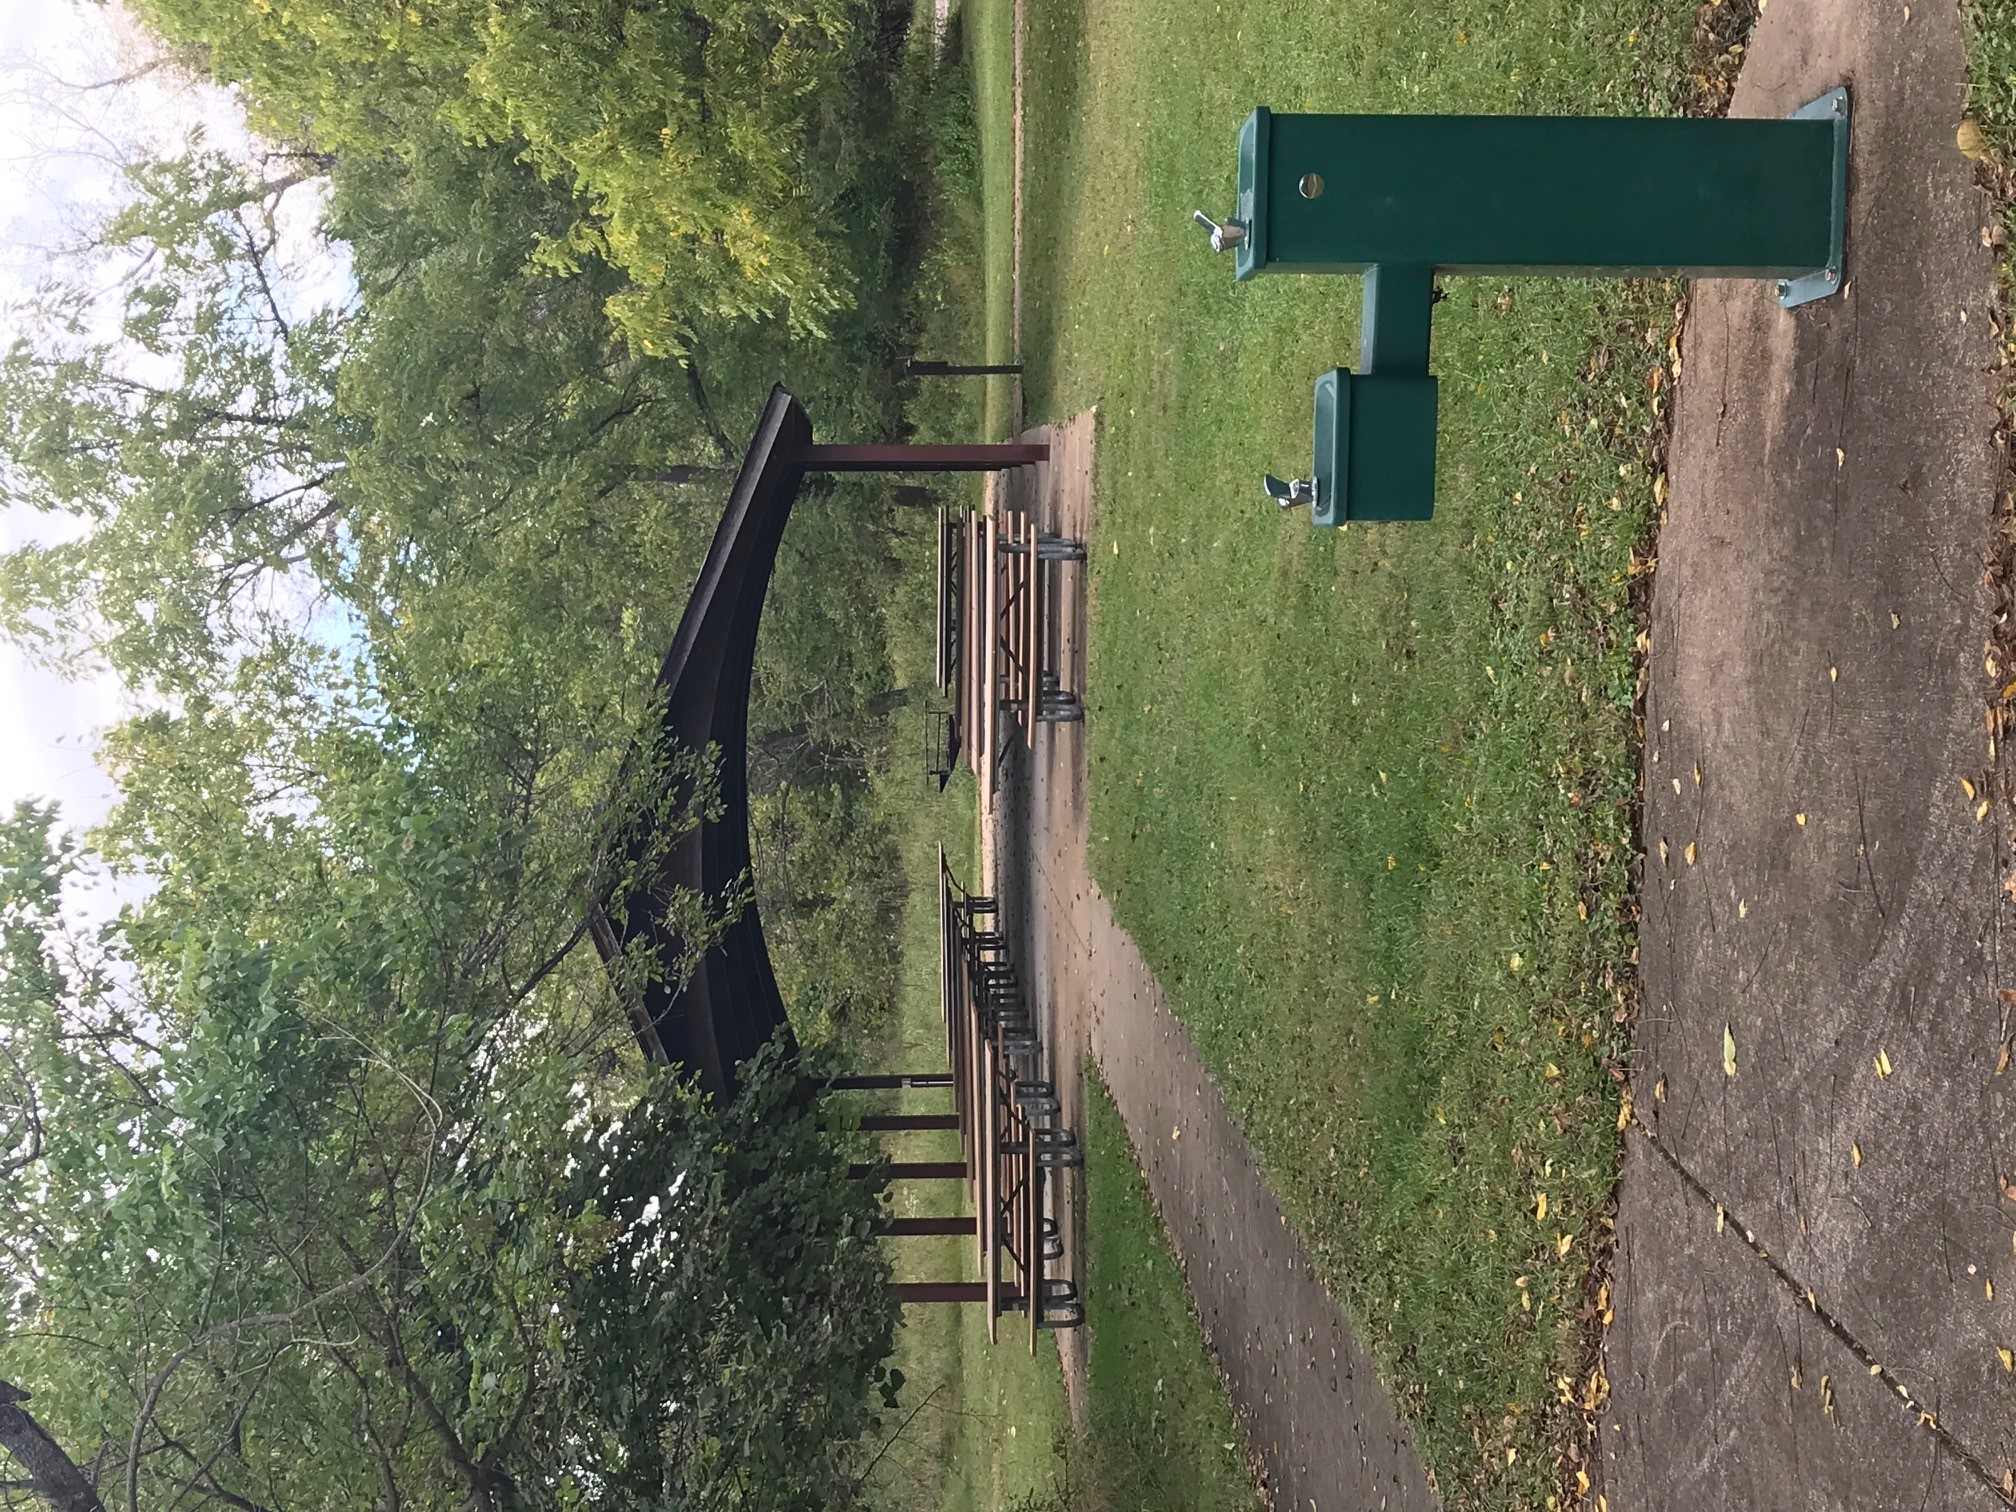 A water fountain stands on the sidewalk that leads to the open picnic shelter